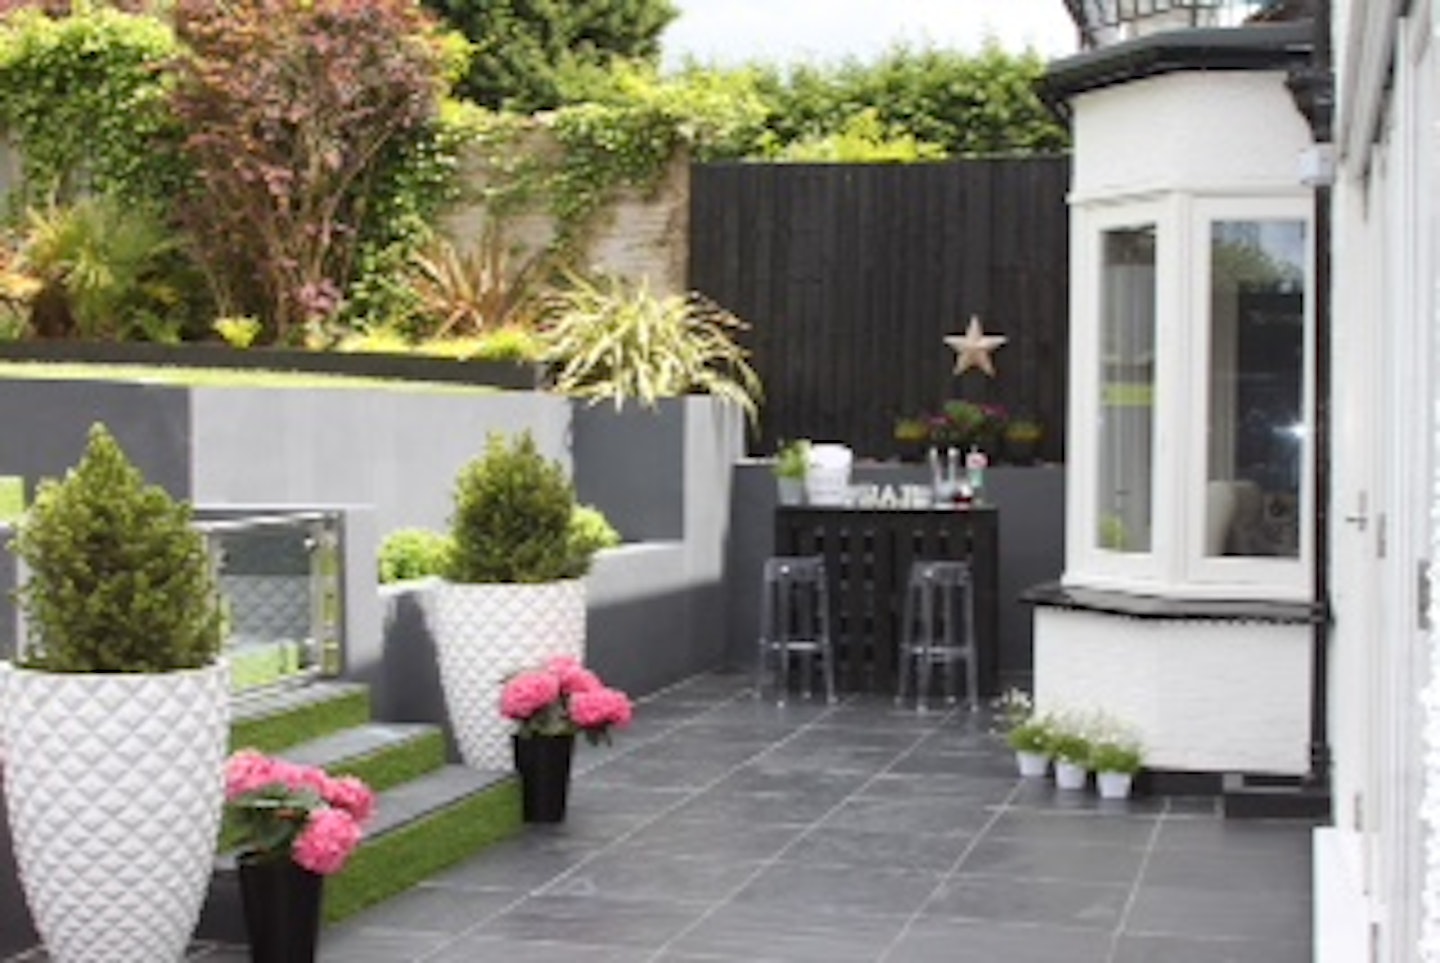 Garden Designs | "Tiers Transformed Our Dull 80s Plot"